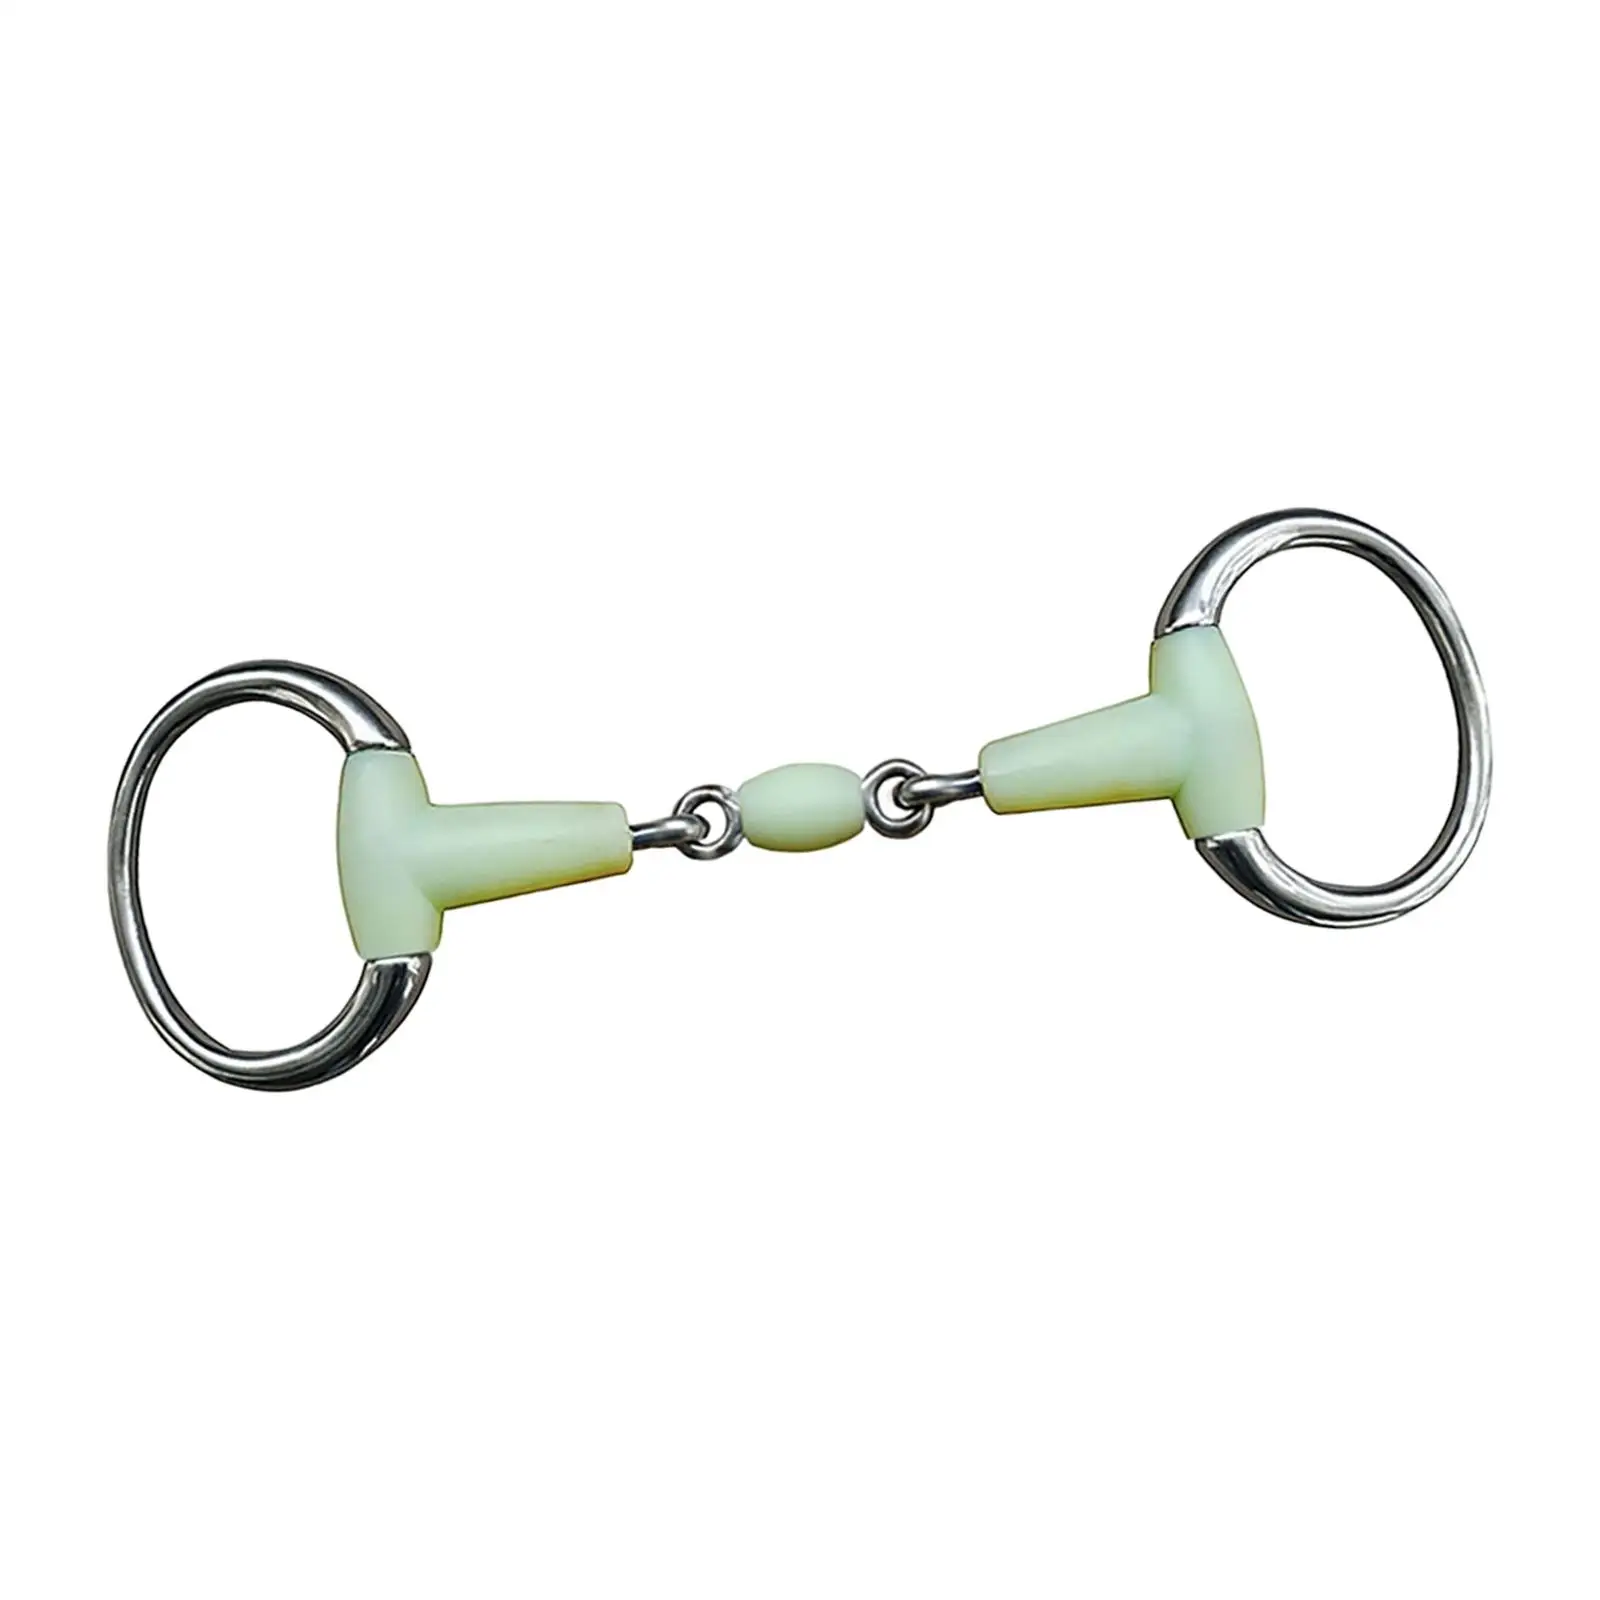 Ultralight Horse Bit Equestrian Accessories for Horse Riding